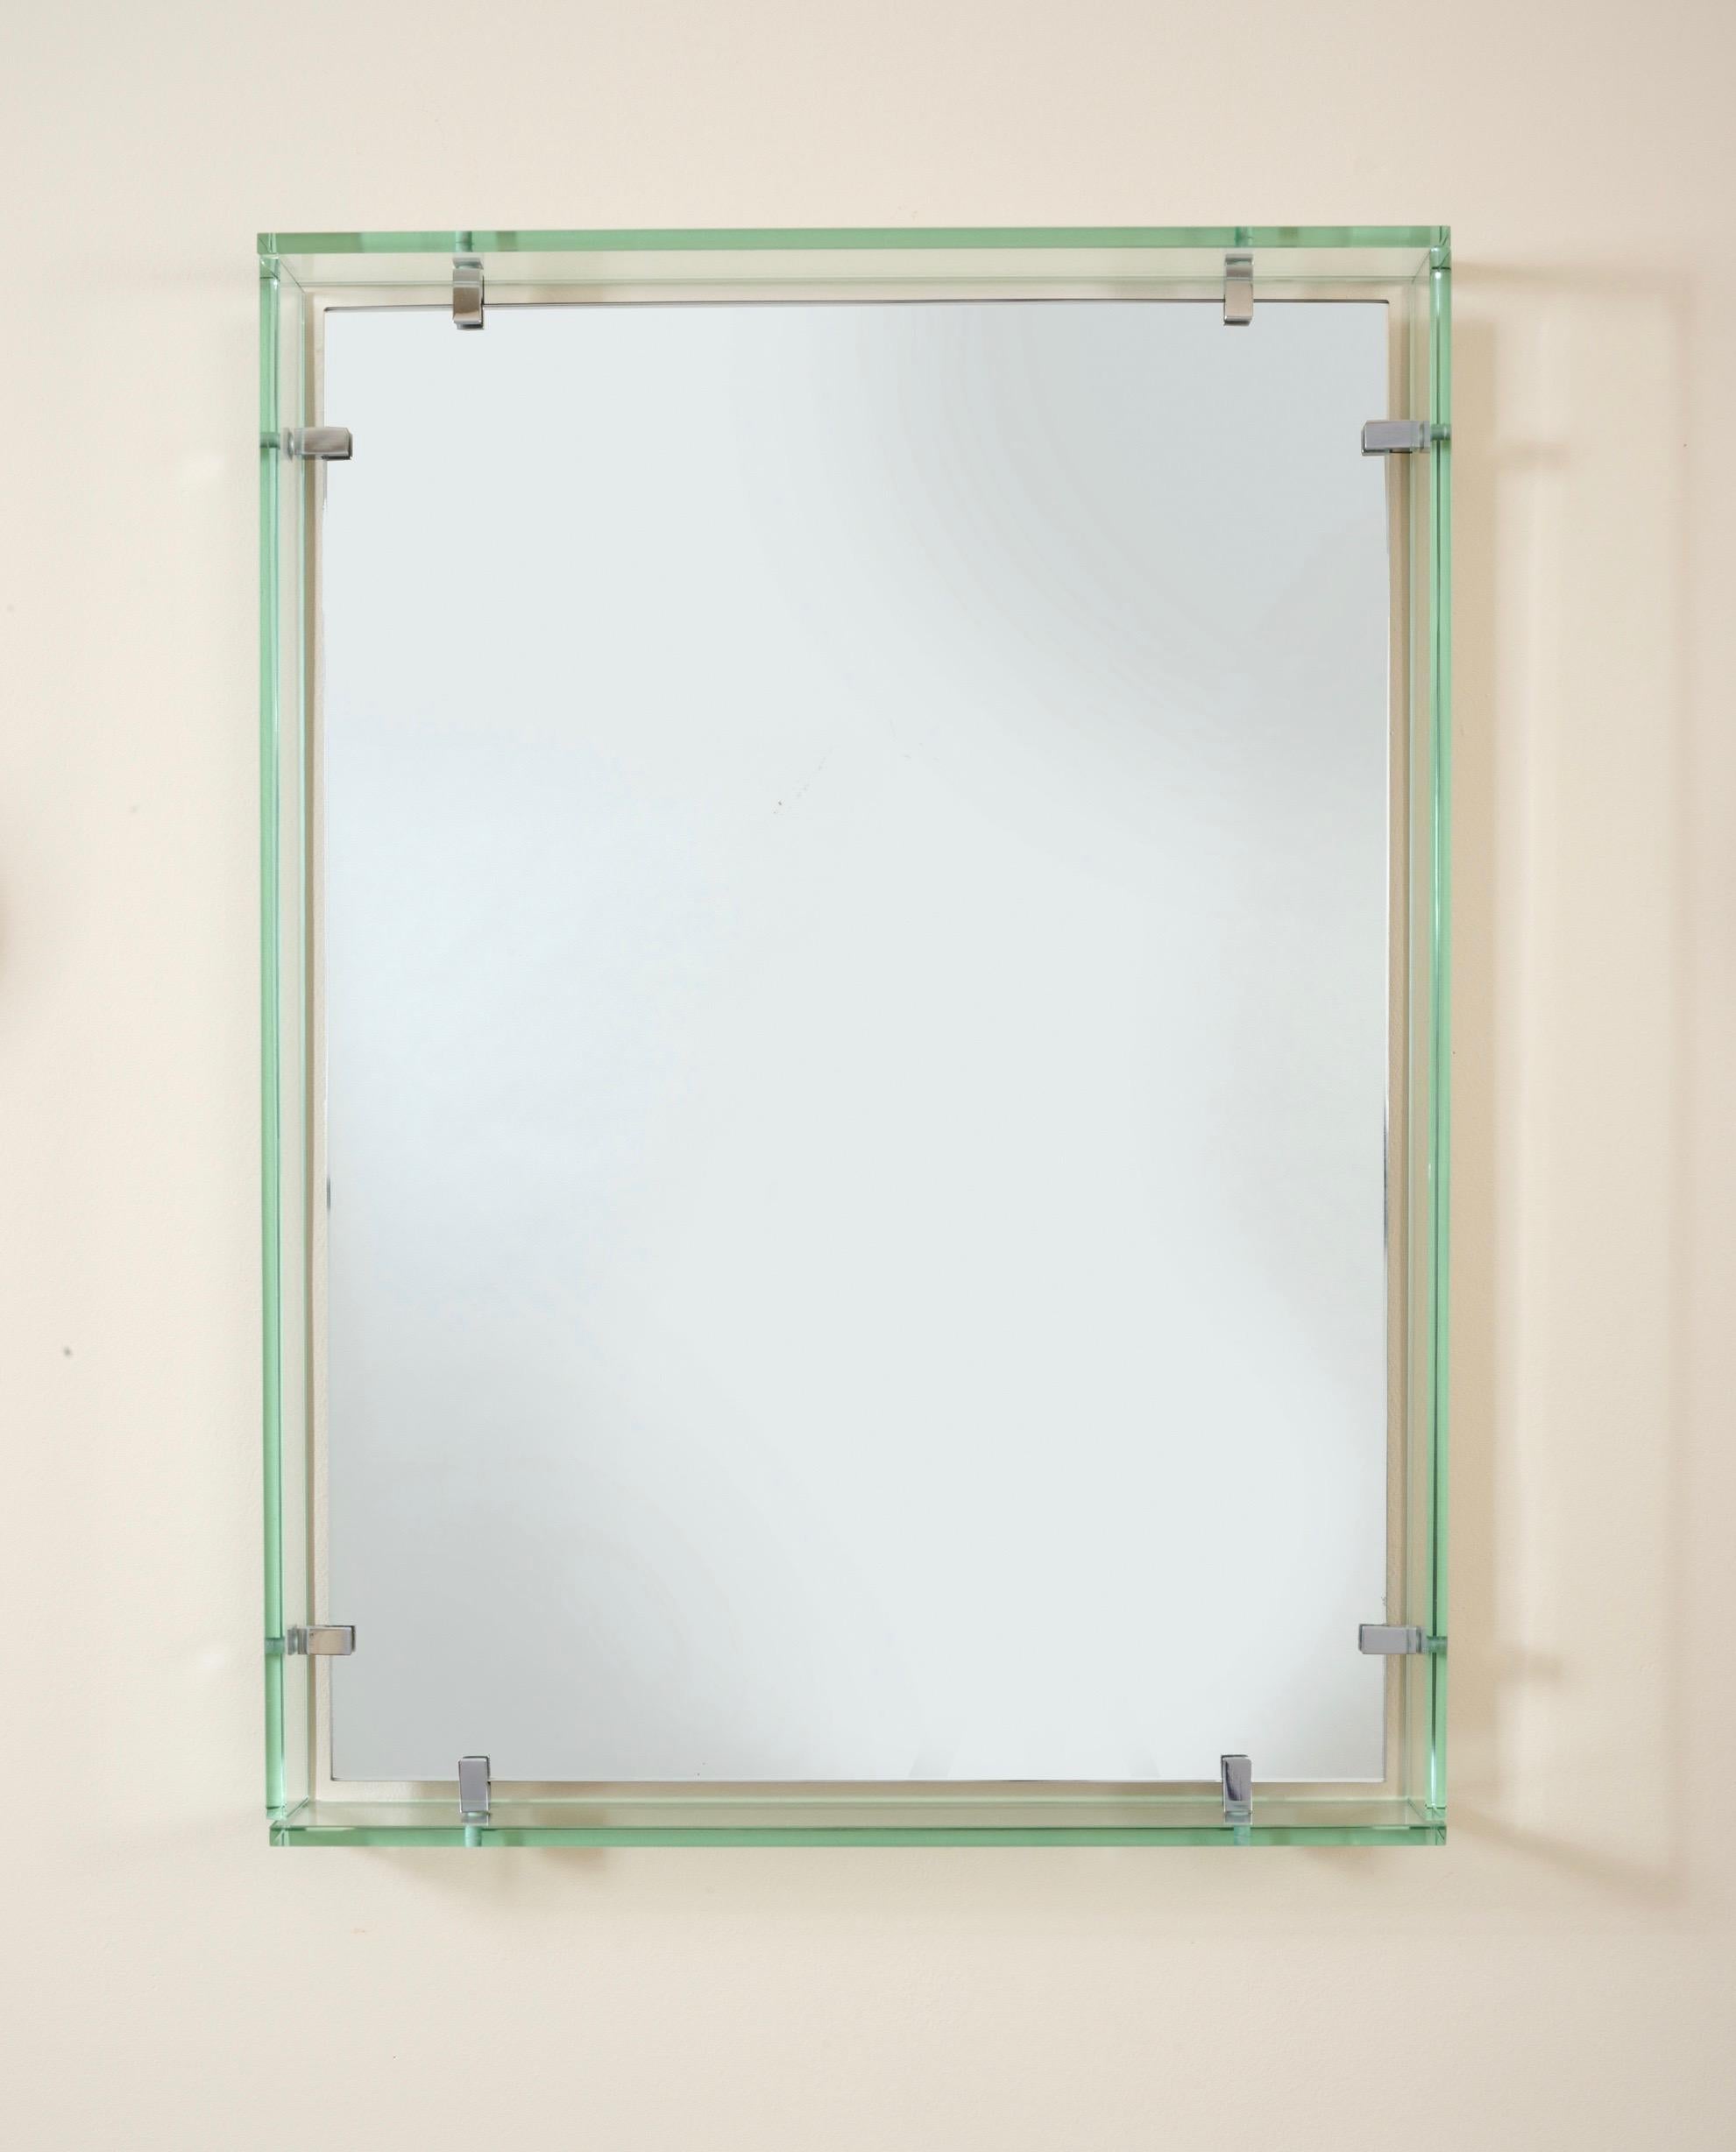 Max Ingrand (1908 - 1969) for Fontana Arte.

A modernist rectangular mirror by Max Ingrand for Fontana Arte, with a floating frame comprised of four thick slabs of crystal united by elegant rectangular mounts in nickeled brass. A purified and